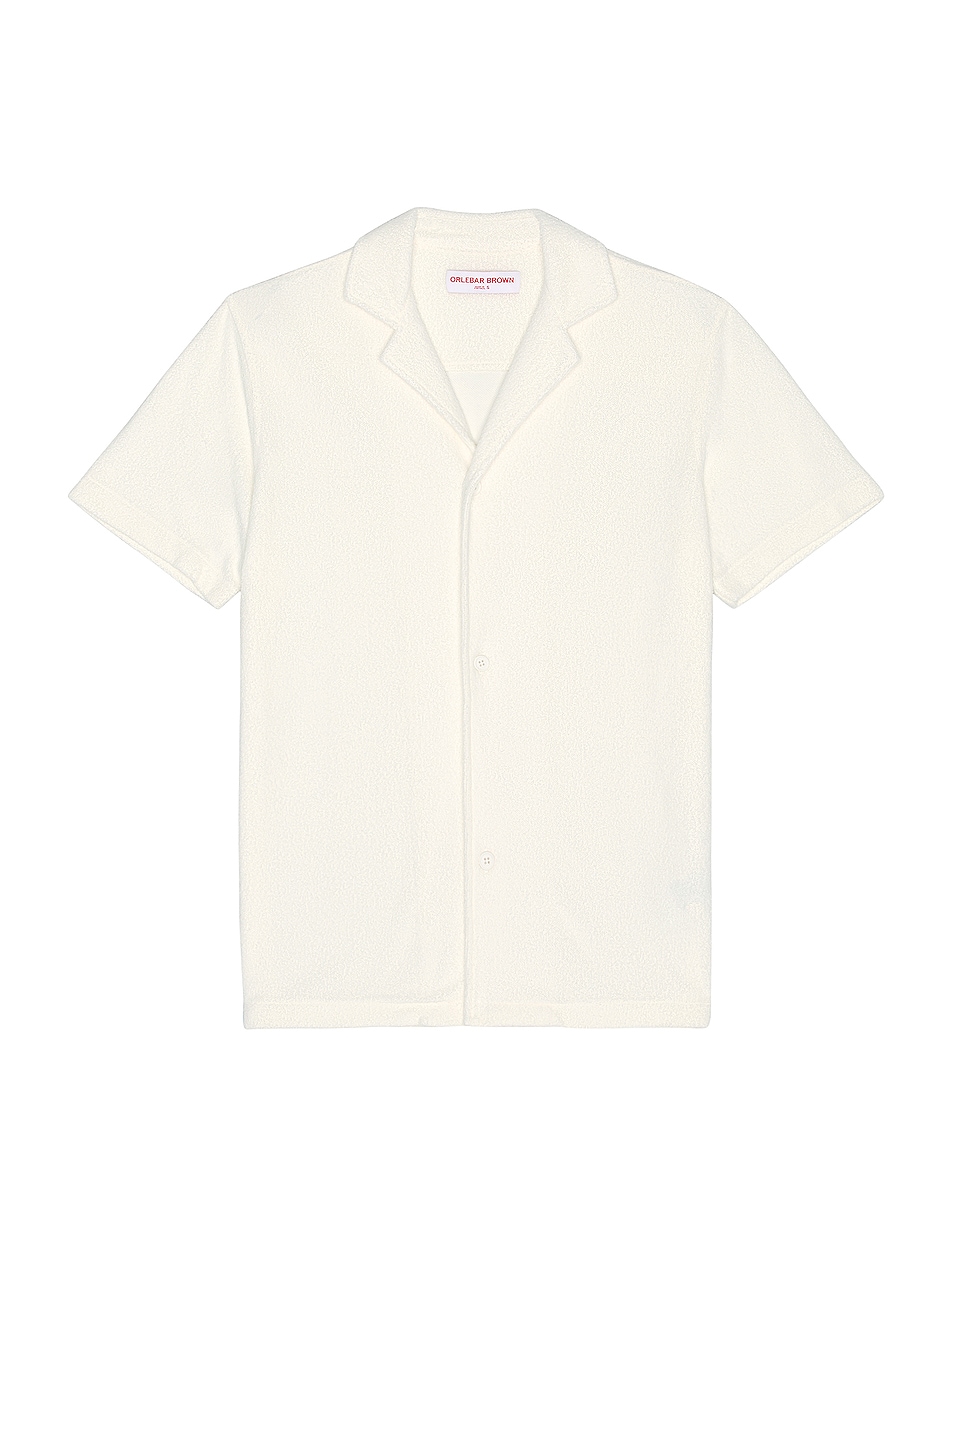 Image 1 of Orlebar Brown Howell Shirt in White Sand